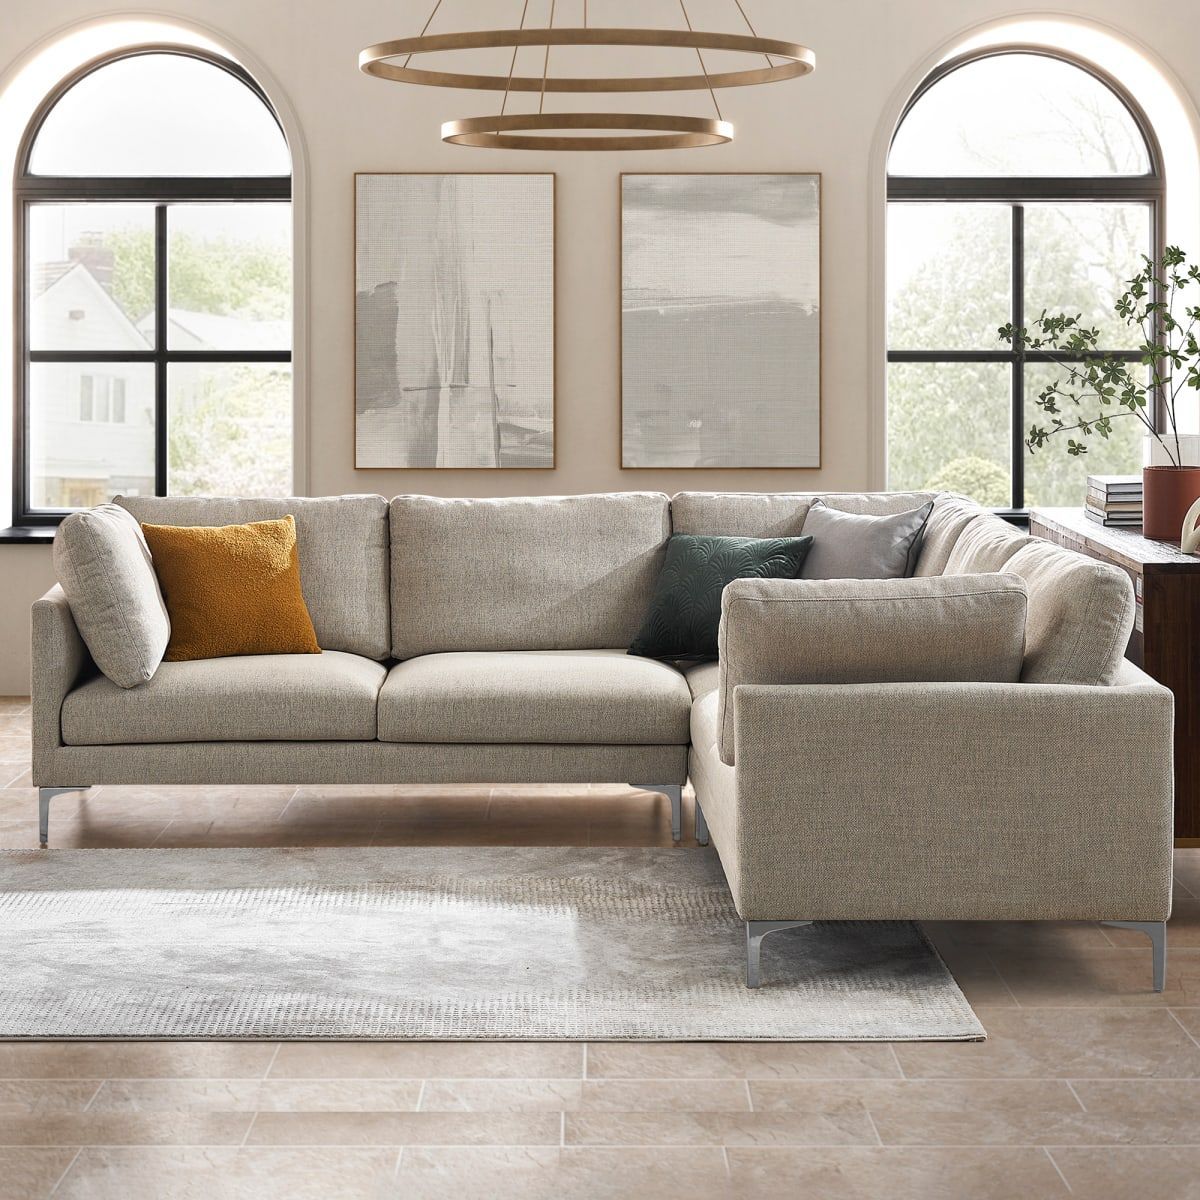 Adams L Shape Sectional Sofa | Castlery | Classic Living Room, Sectional  Sofa, Castlery For Beige L Shaped Sectional Sofas (View 8 of 15)